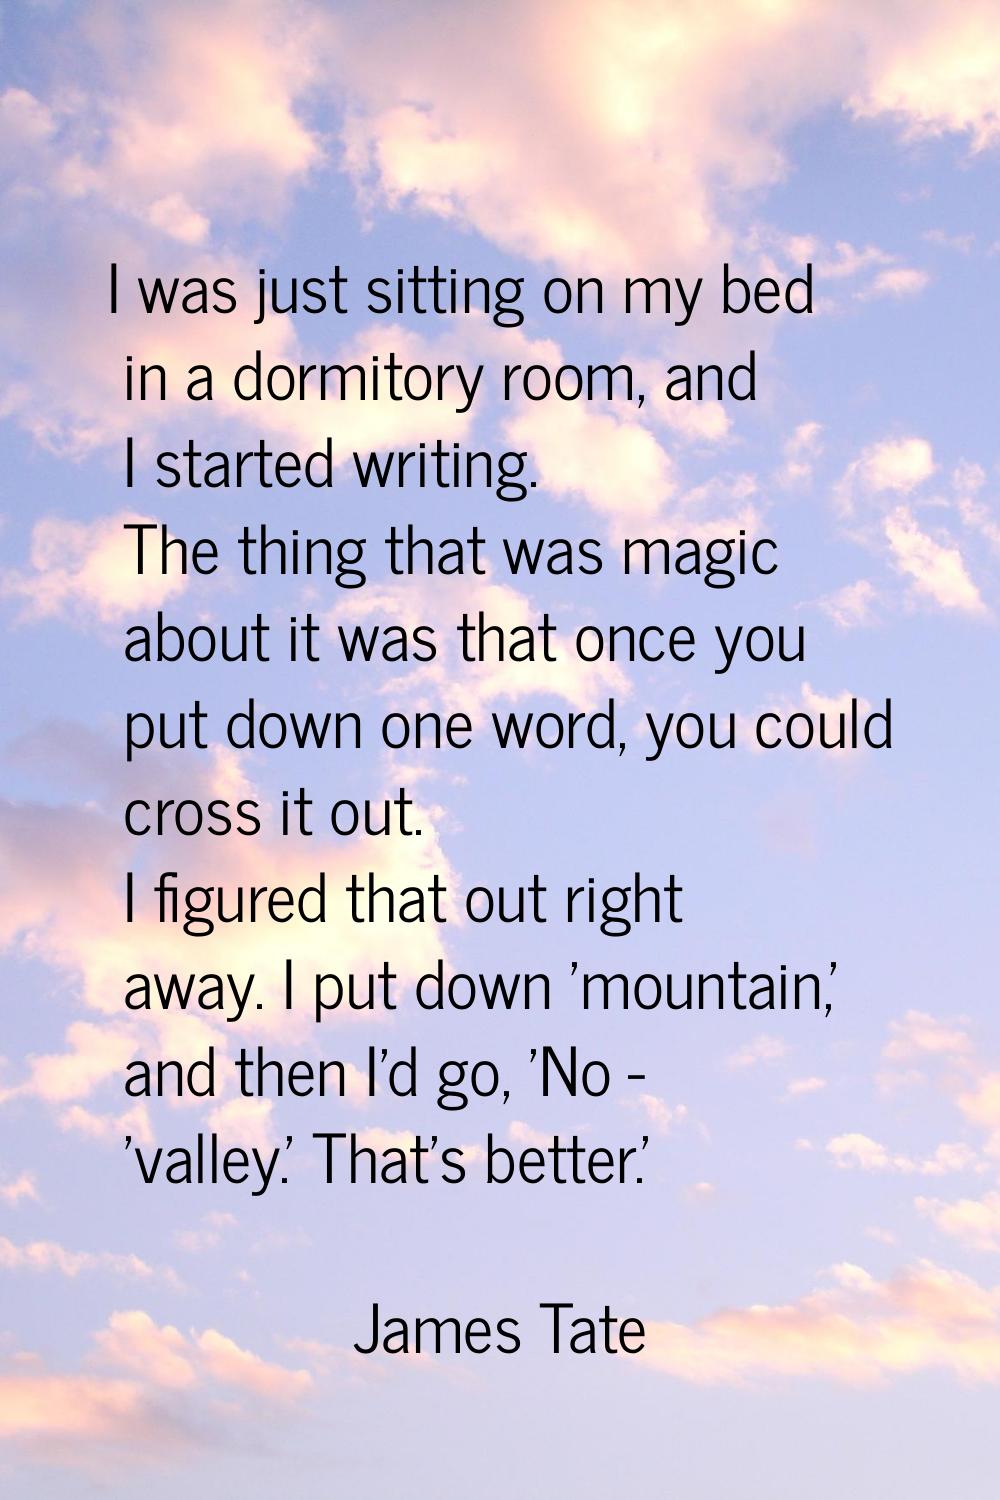 I was just sitting on my bed in a dormitory room, and I started writing. The thing that was magic a